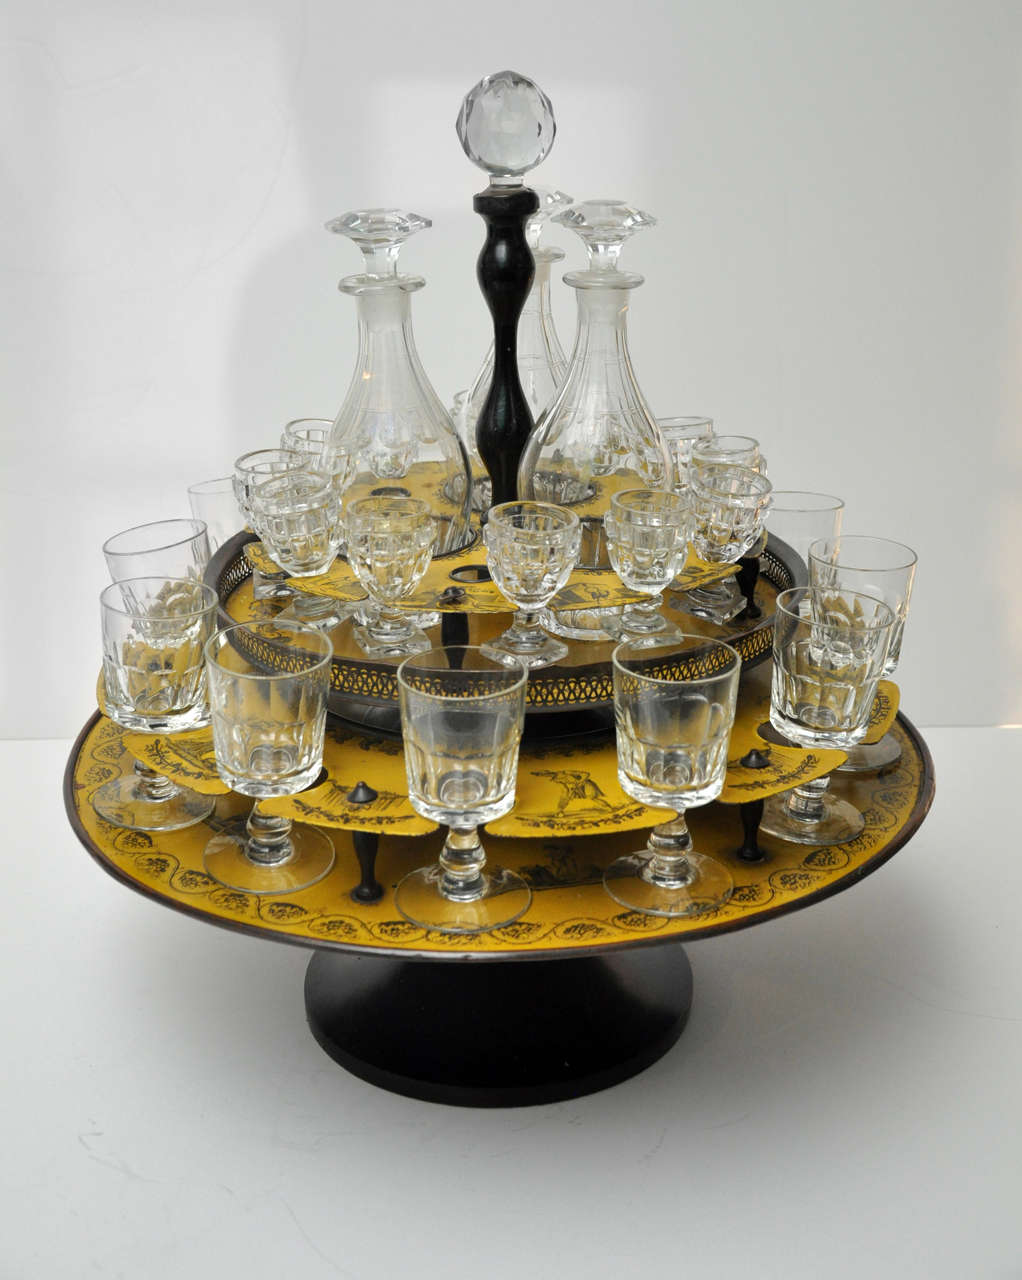 French Yellow Tole Peinte Two Tier Glassholder,
includes 12 small glasses, 12 large goblets, 3 decanters, 
Circa 1840